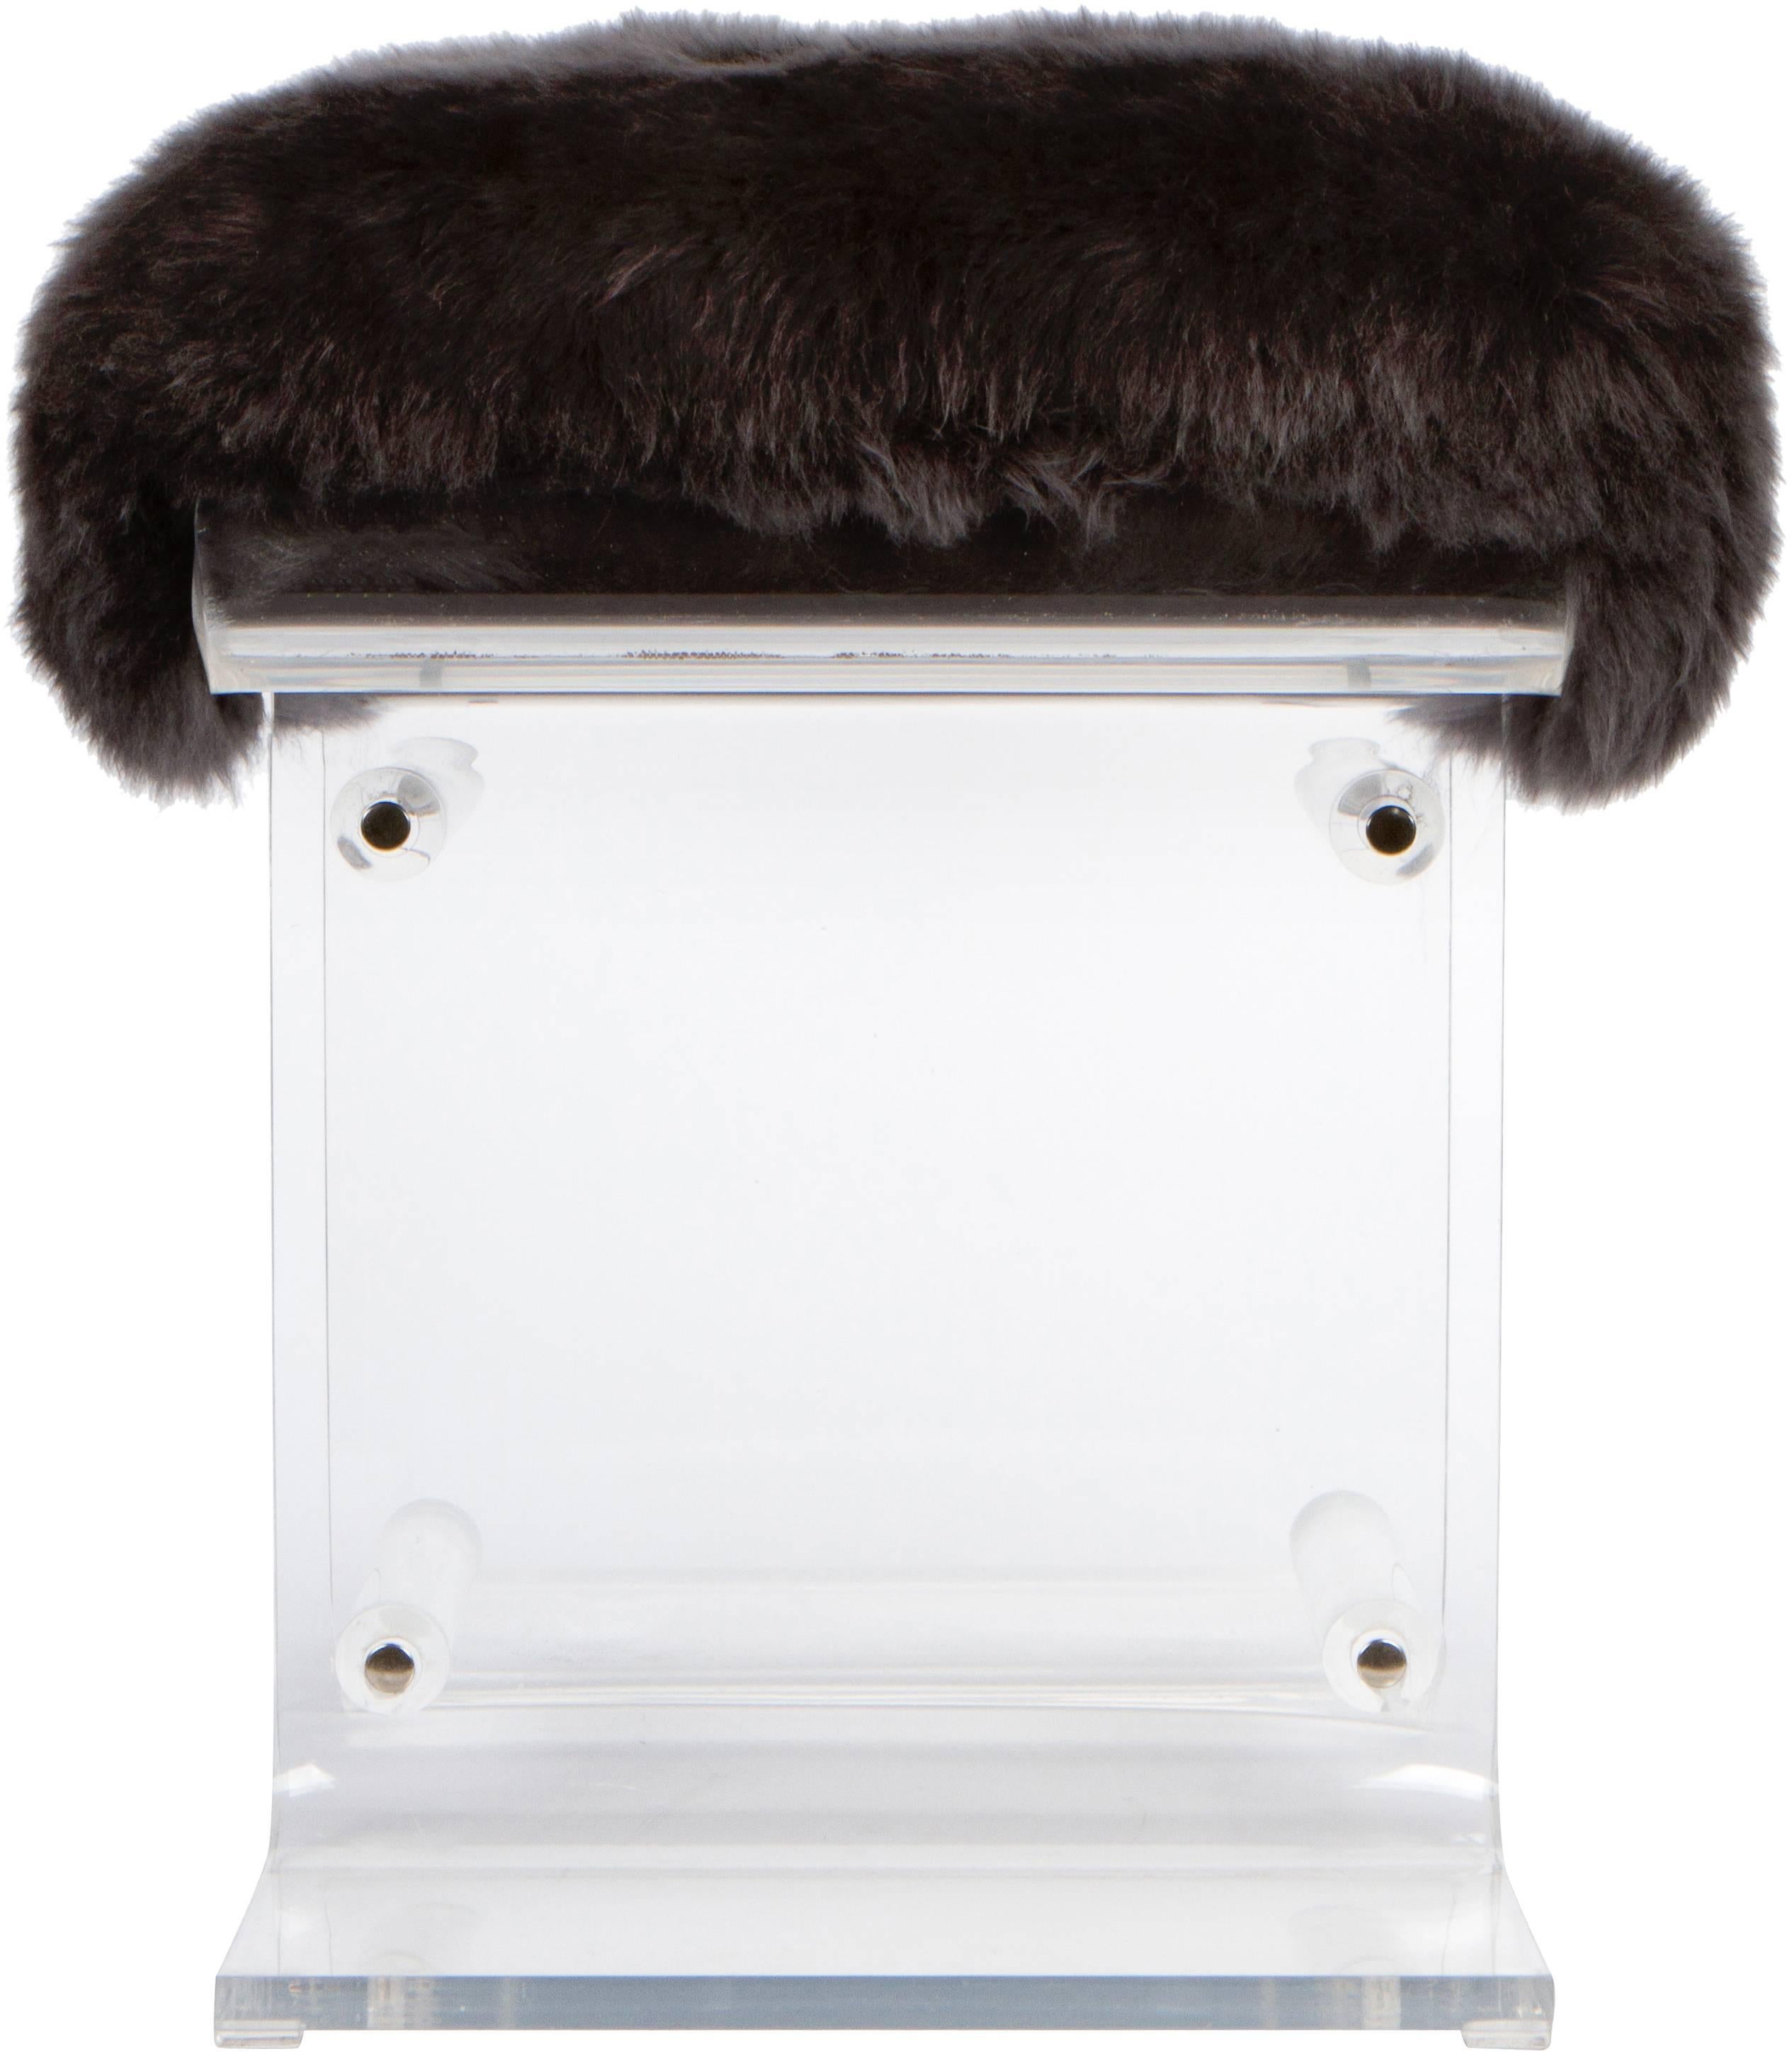 Glamorous lucite bench, circa 1980s. Newly upholstered in a charcoal grey fur.